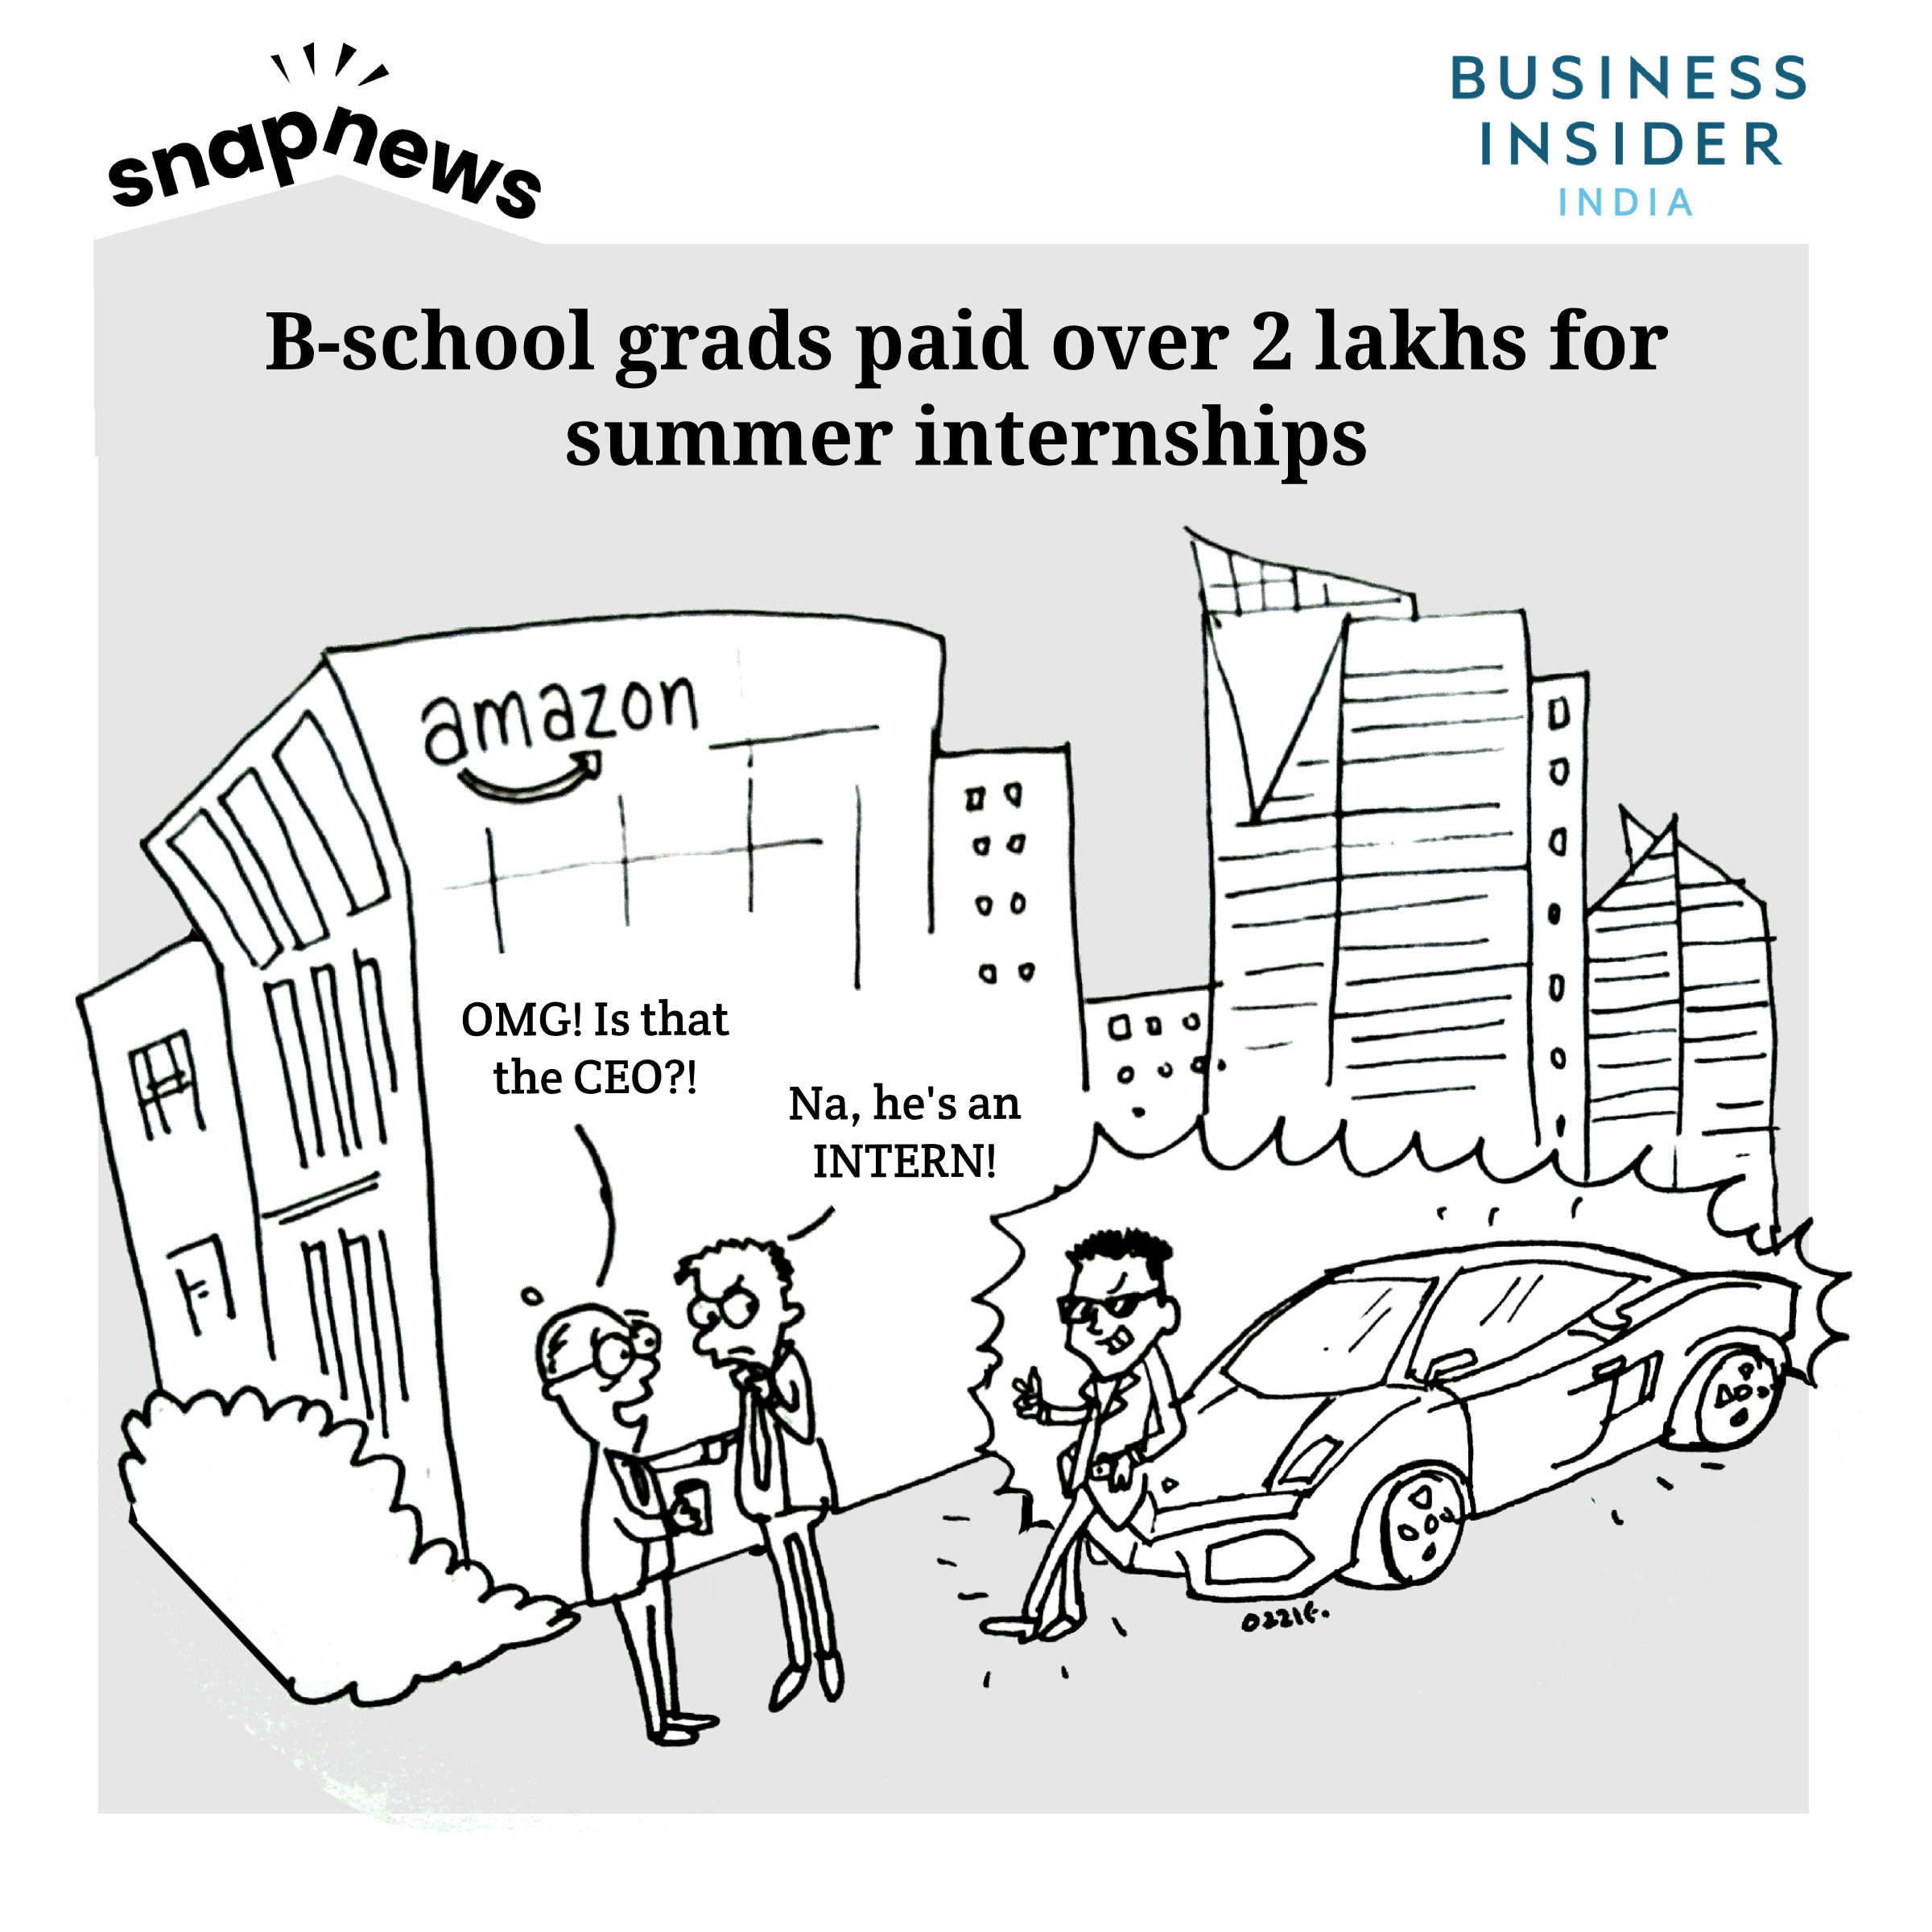 india-s-top-b-school-graduates-are-being-paid-over-2-lakh-for-summer